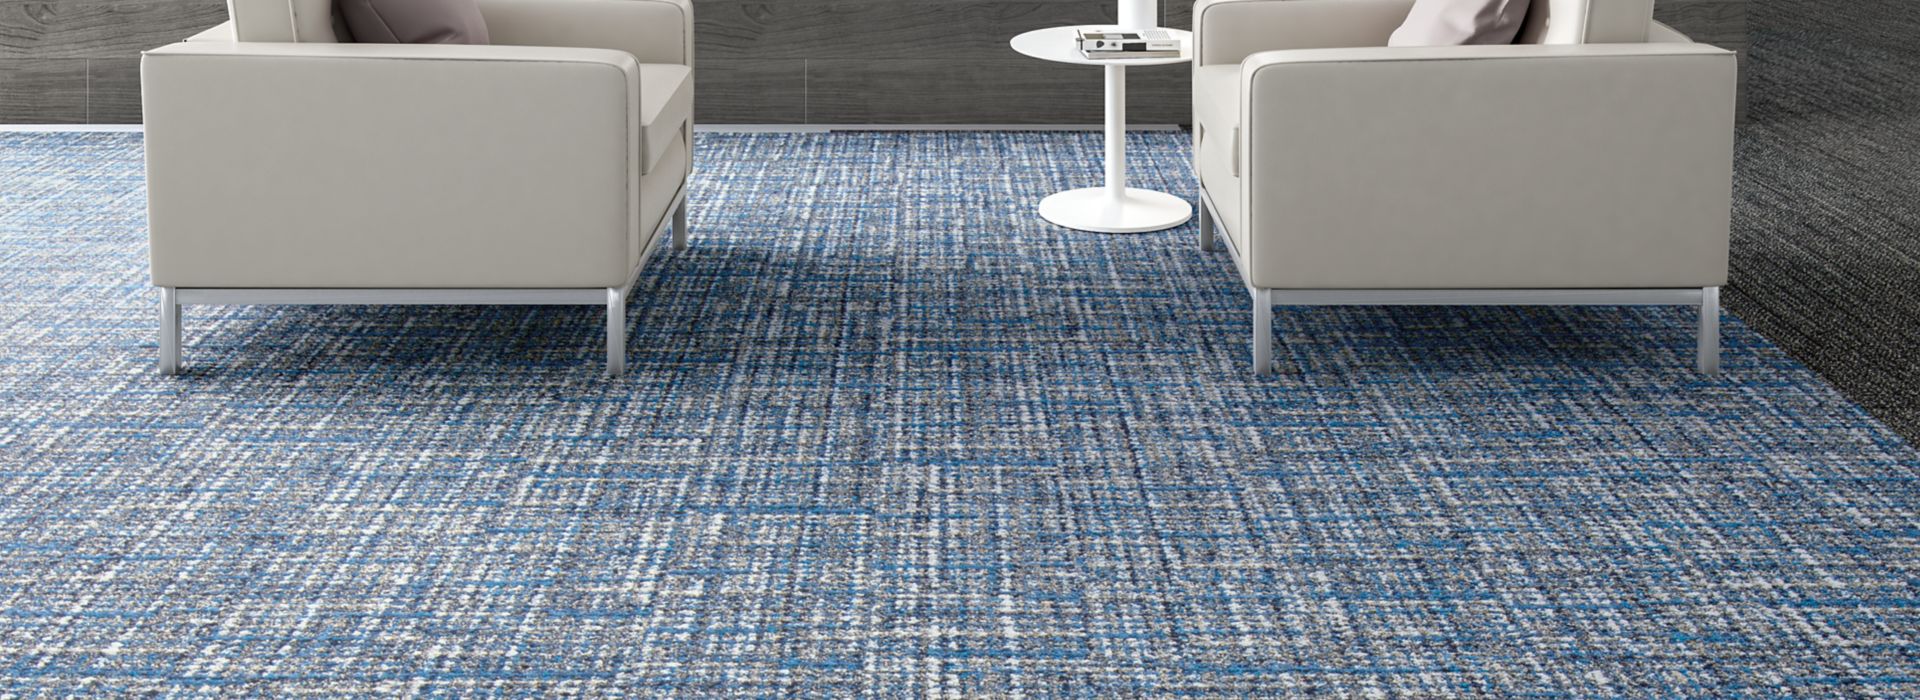 Interface WW895 plank carpet tile in lobby area with couches and side table  numéro d’image 1